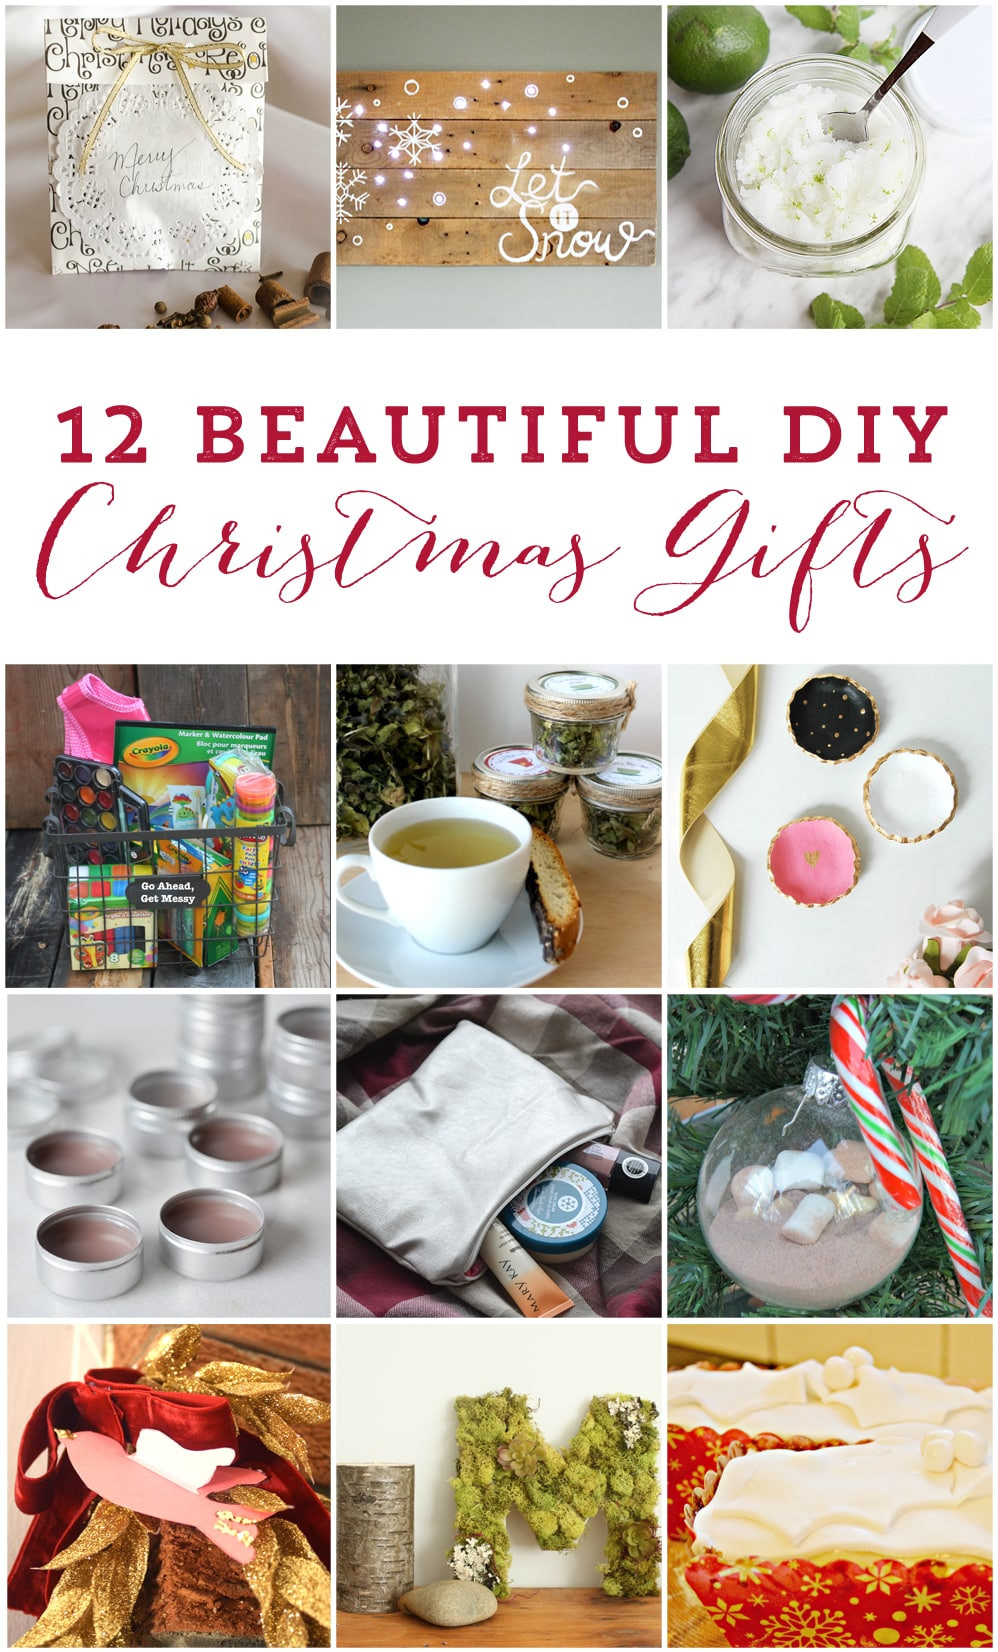 DIY Gifts Ideas For Christmas
 Homemade Peppermint Tea [with FREE printable] Love